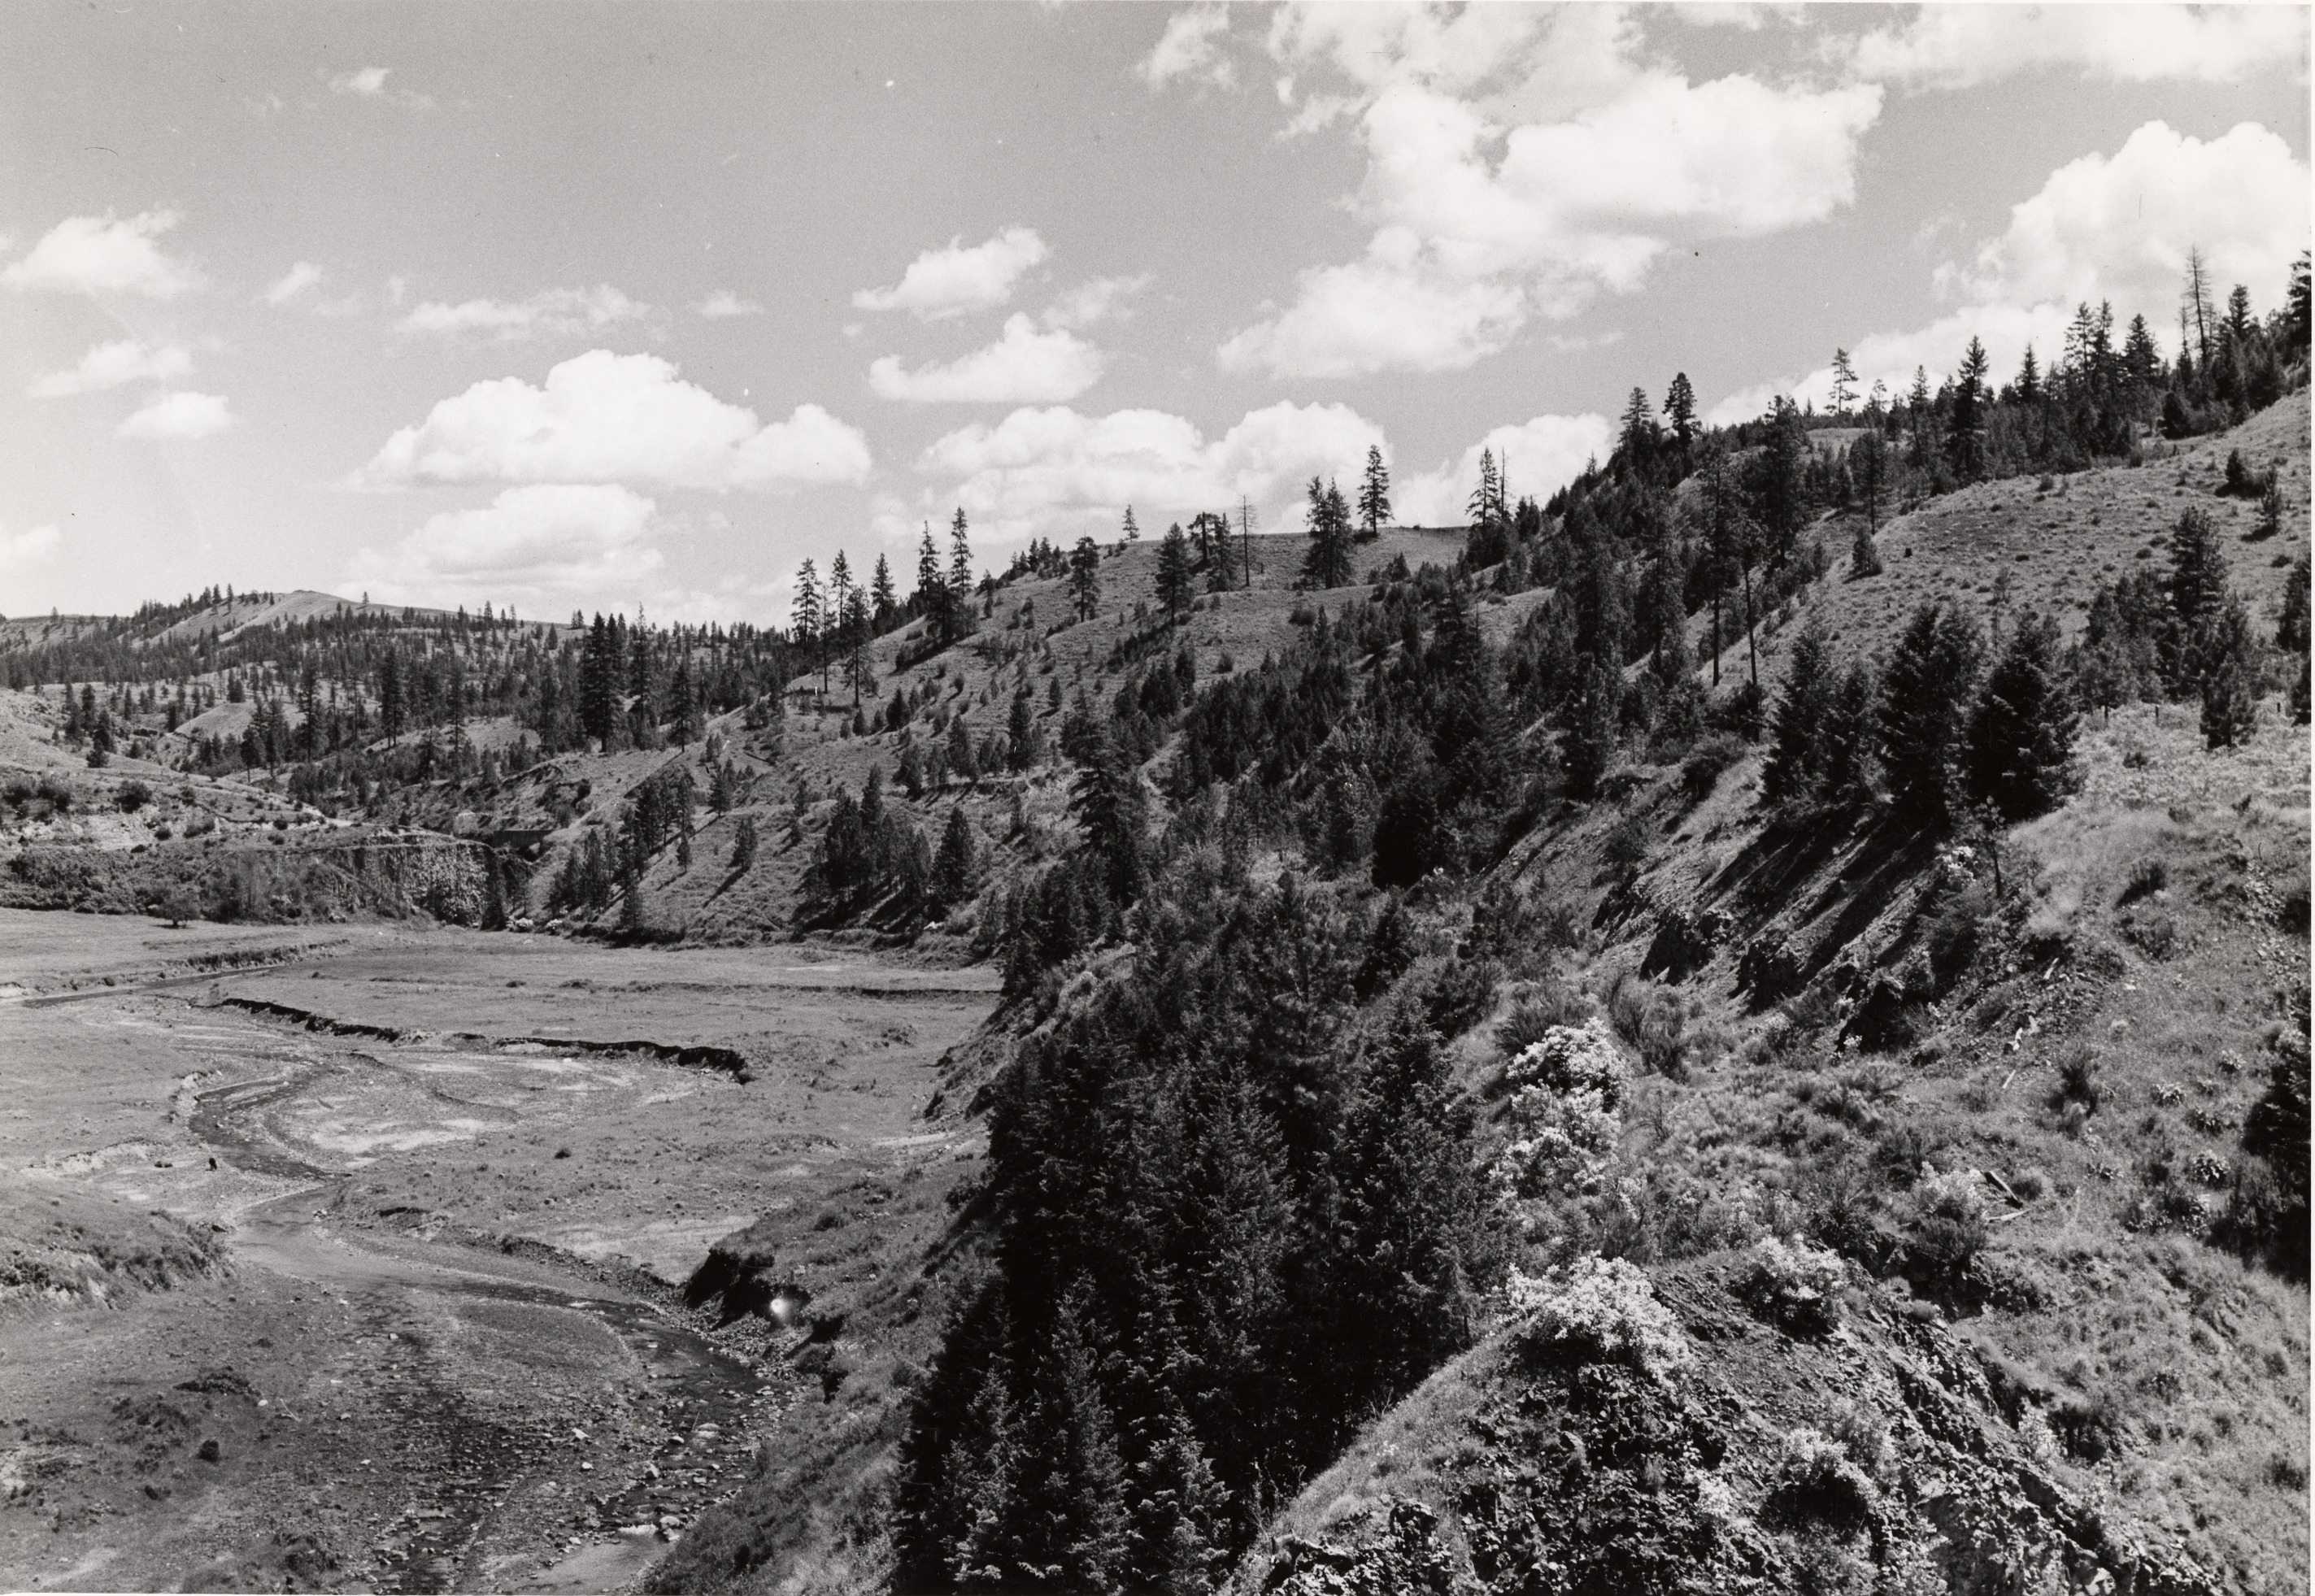 Black and white photograph of a winding creek in a valley surrounded by steep hills with scattered trees